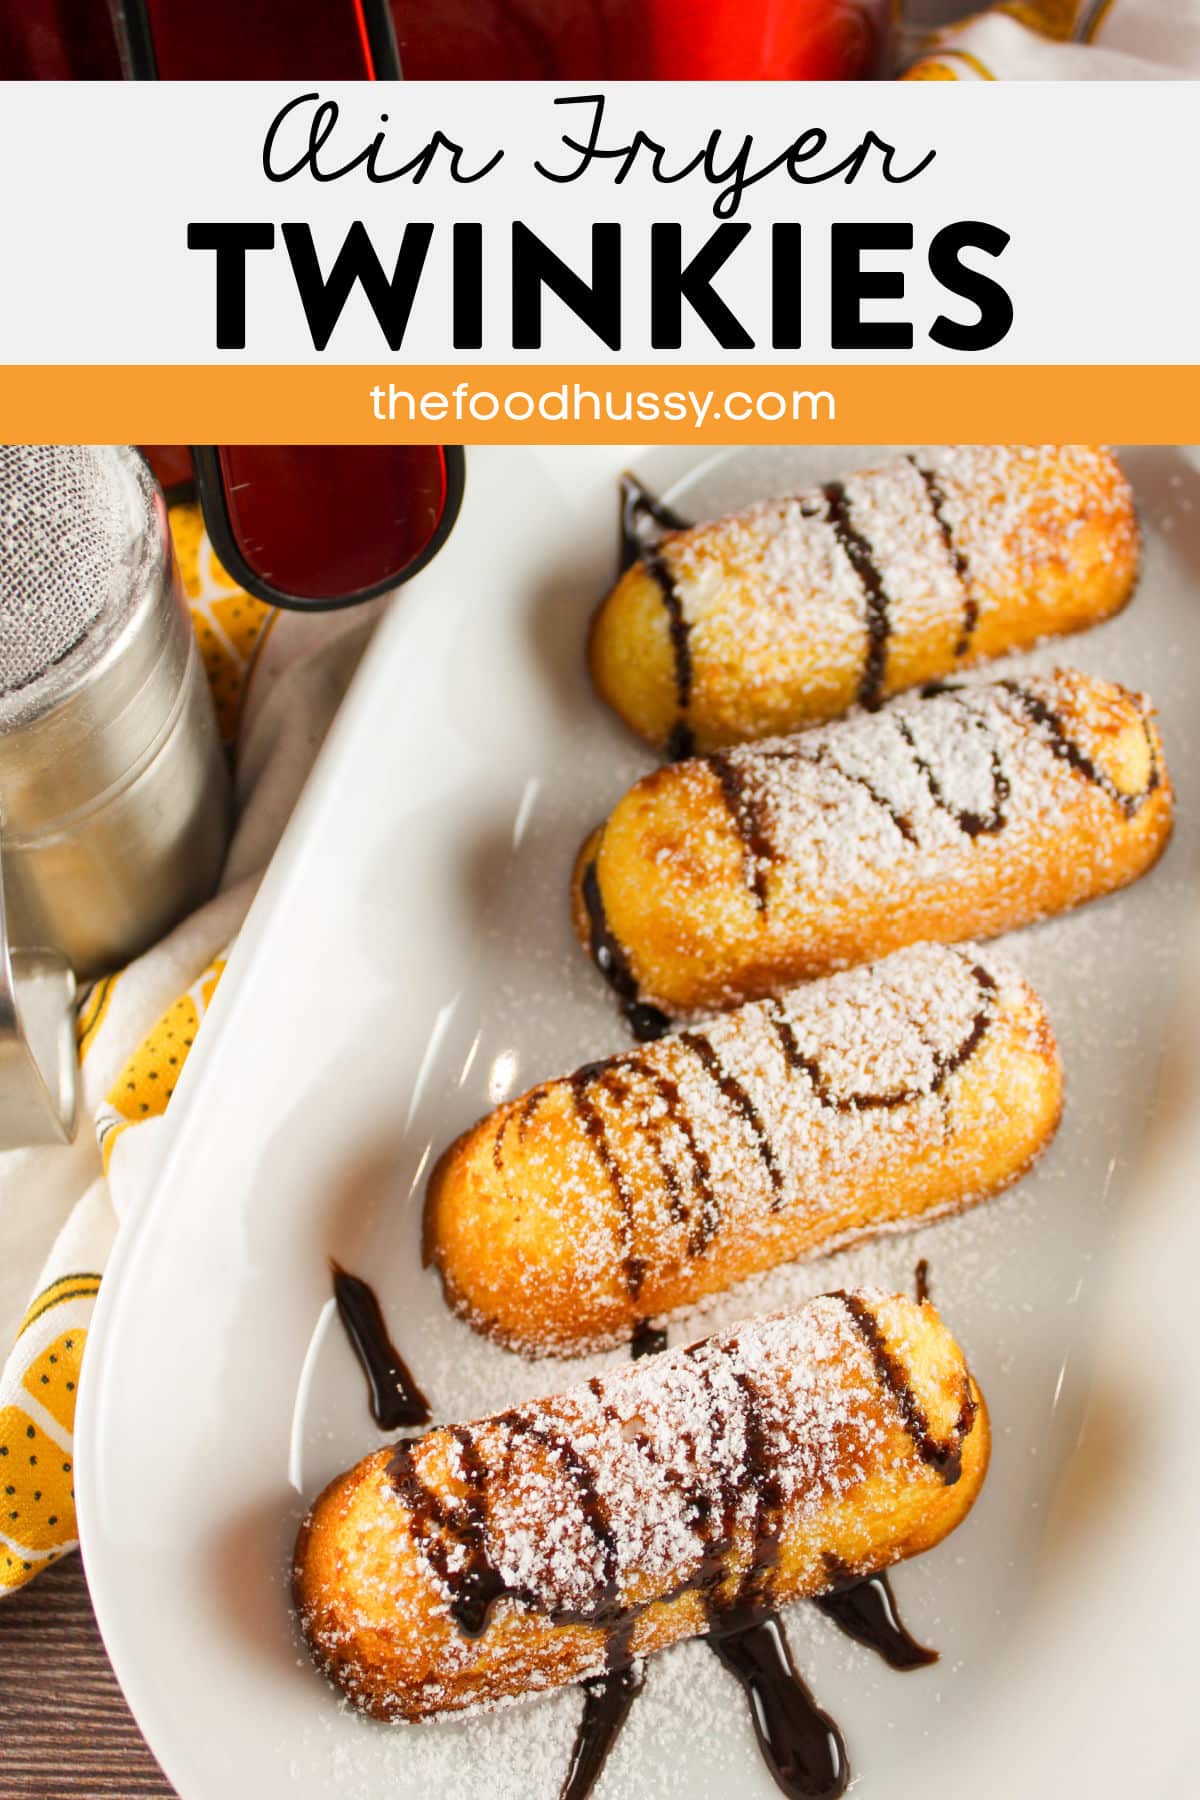 Air Fryer Twinkies are a super-fun and easy dessert for kids and adults alike! Take those taste treats and amp them up by making them crispy on the outside and ooey-gooey on the inside in just 3 minutes! via @foodhussy